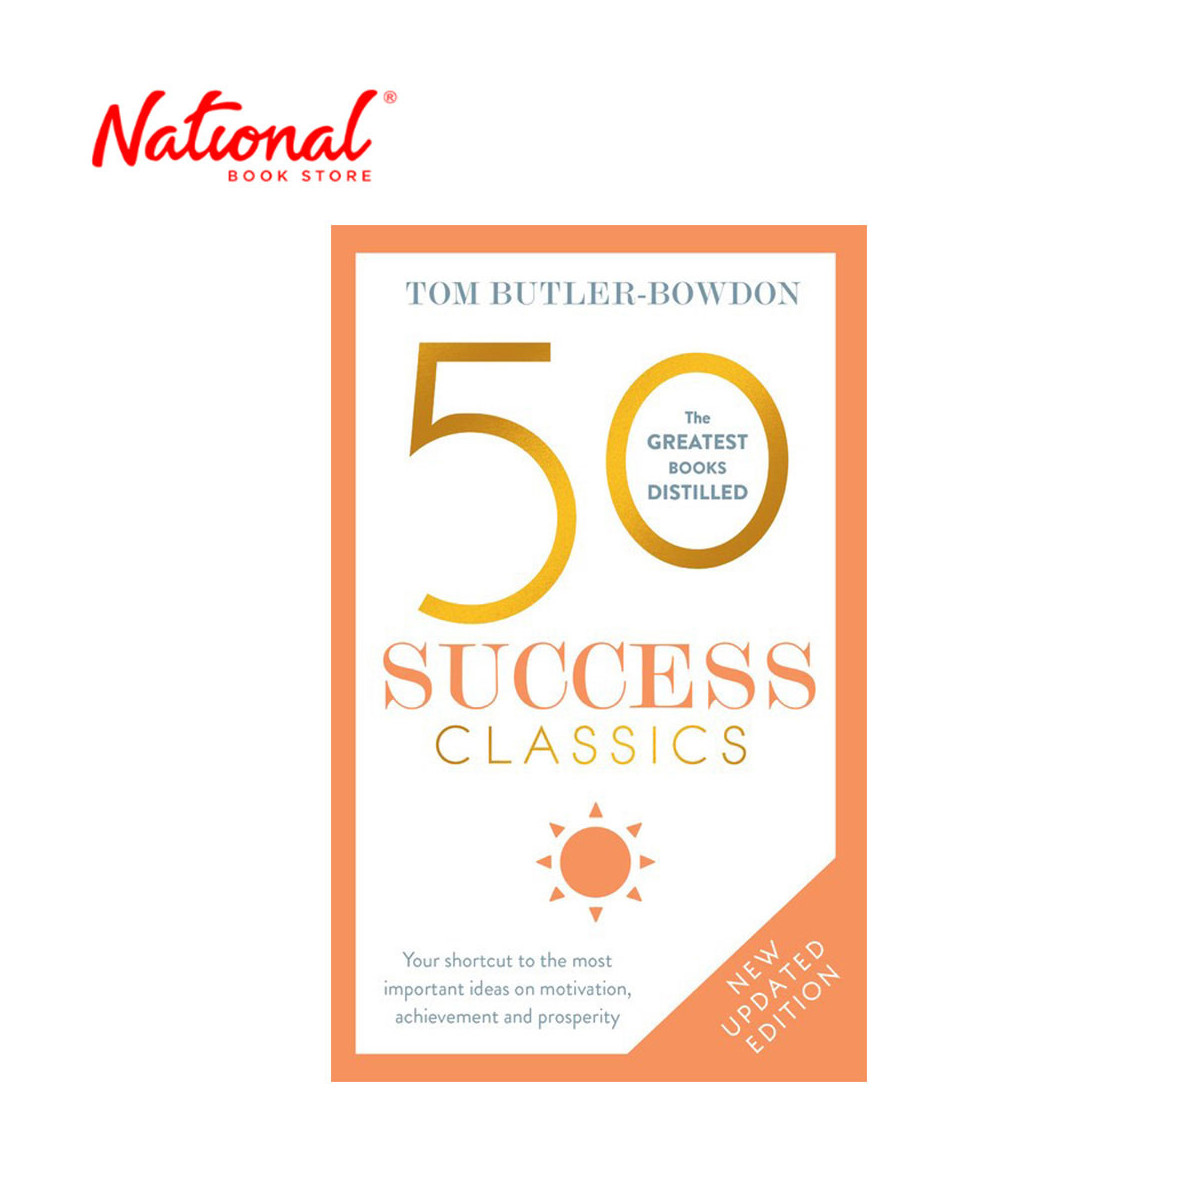 50 Success Classics Second Edition by Tom Butler-Bowdon - Trade Paperback - Nonfiction - Careers